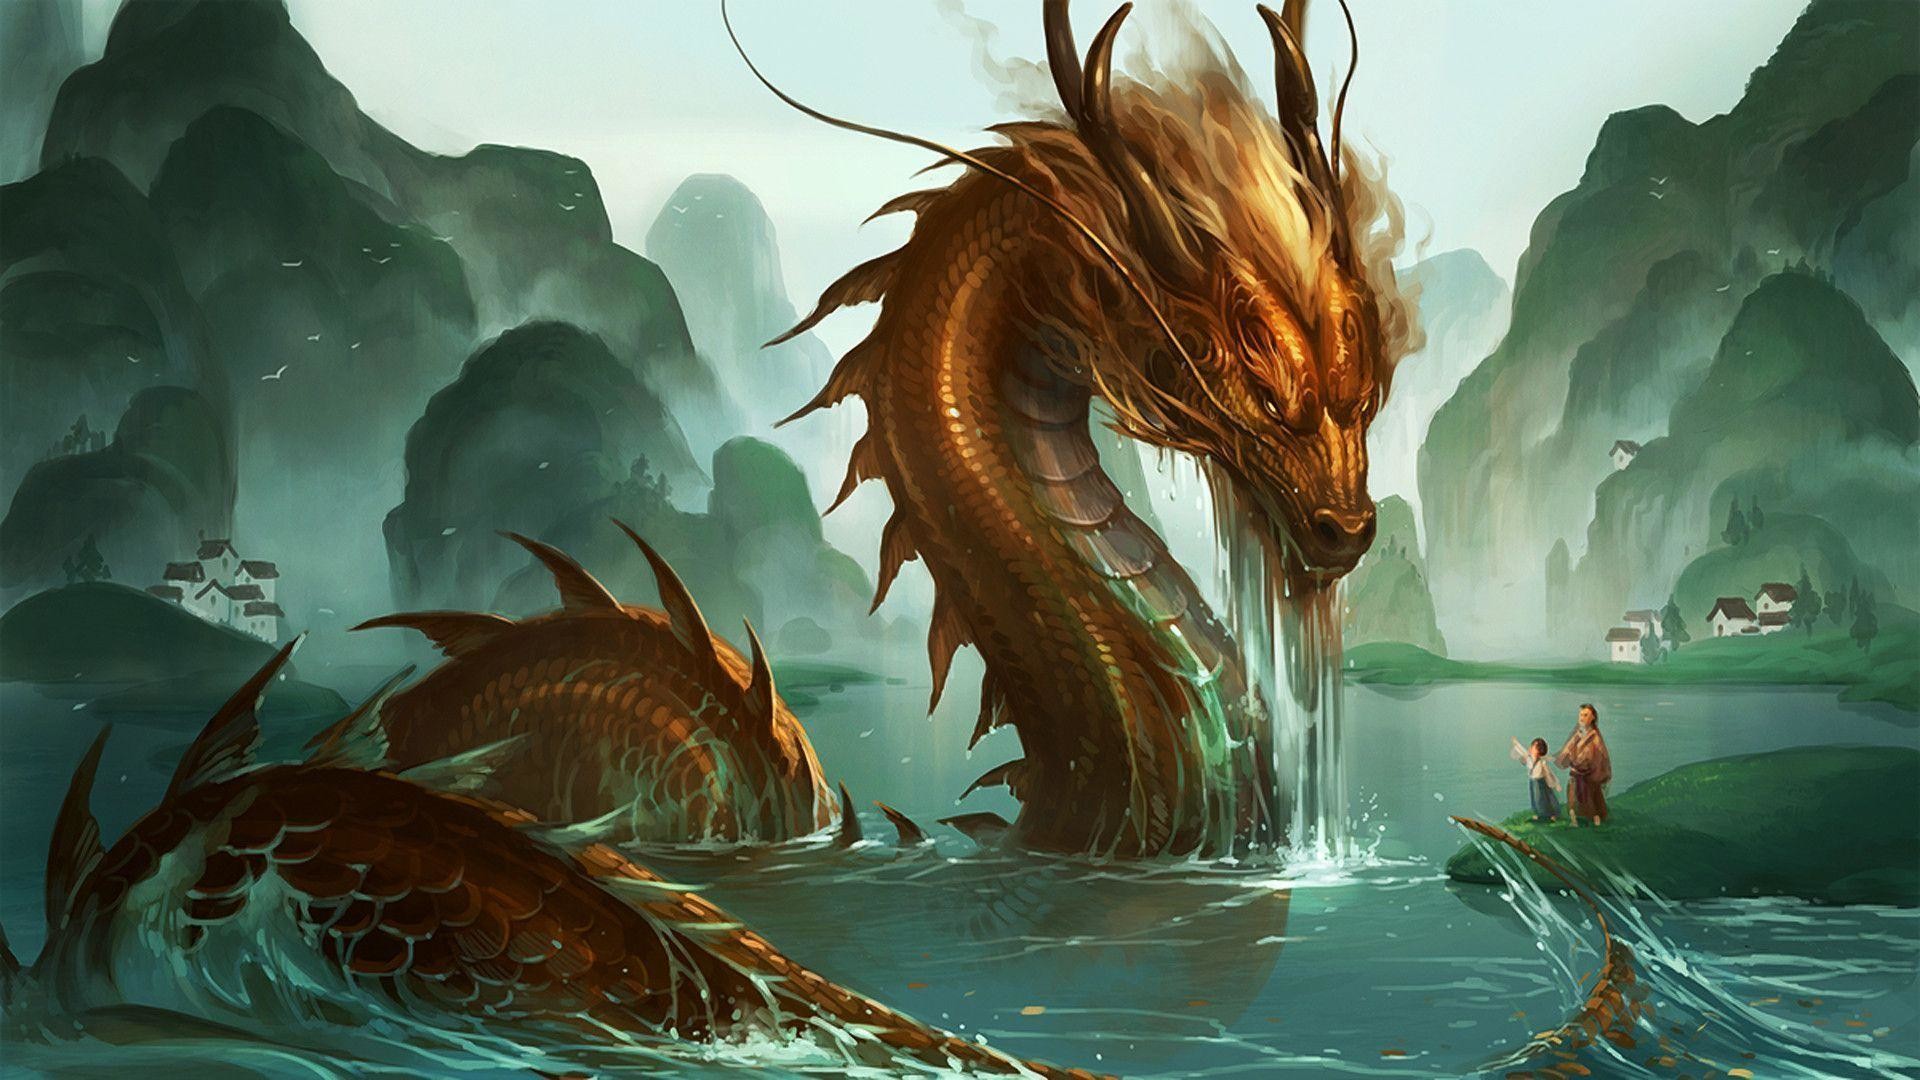 1920x1080 Images For Chinese Dragon Wallpaper 